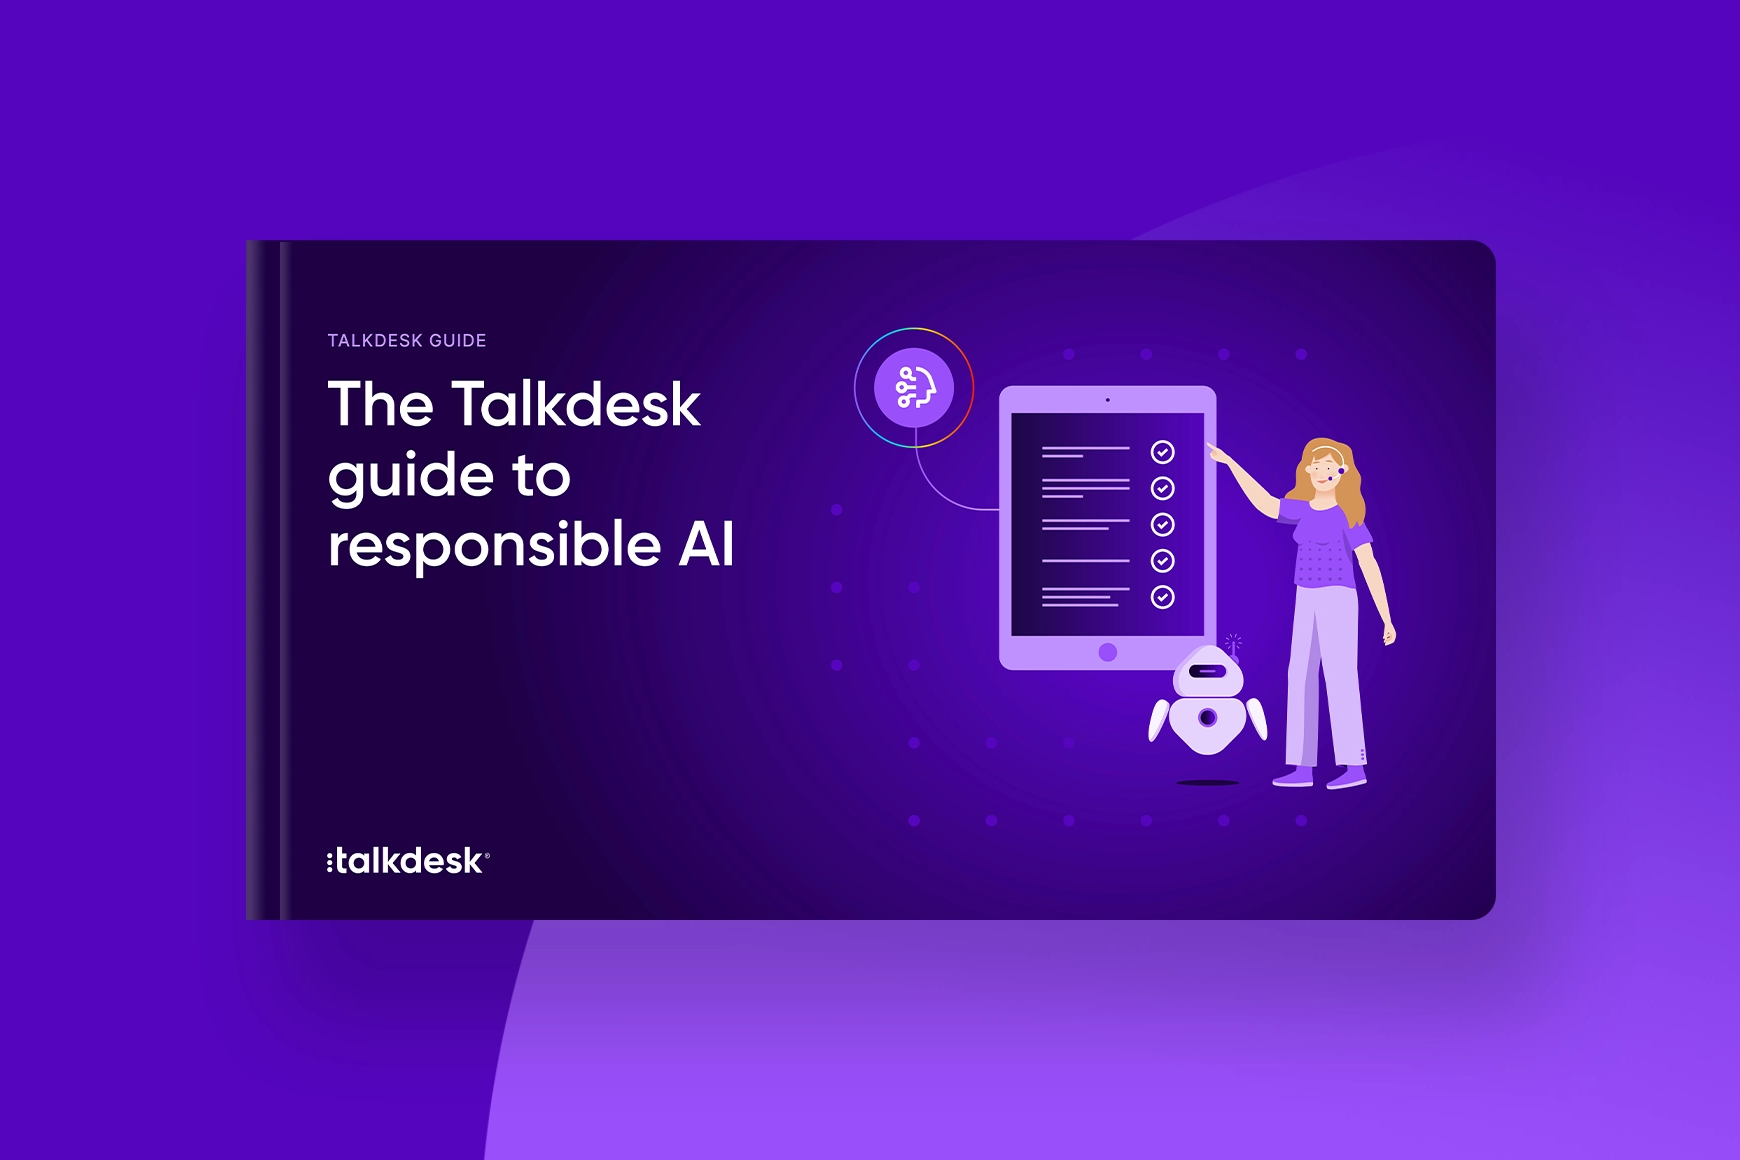 The Talkdesk guide to responsible AI